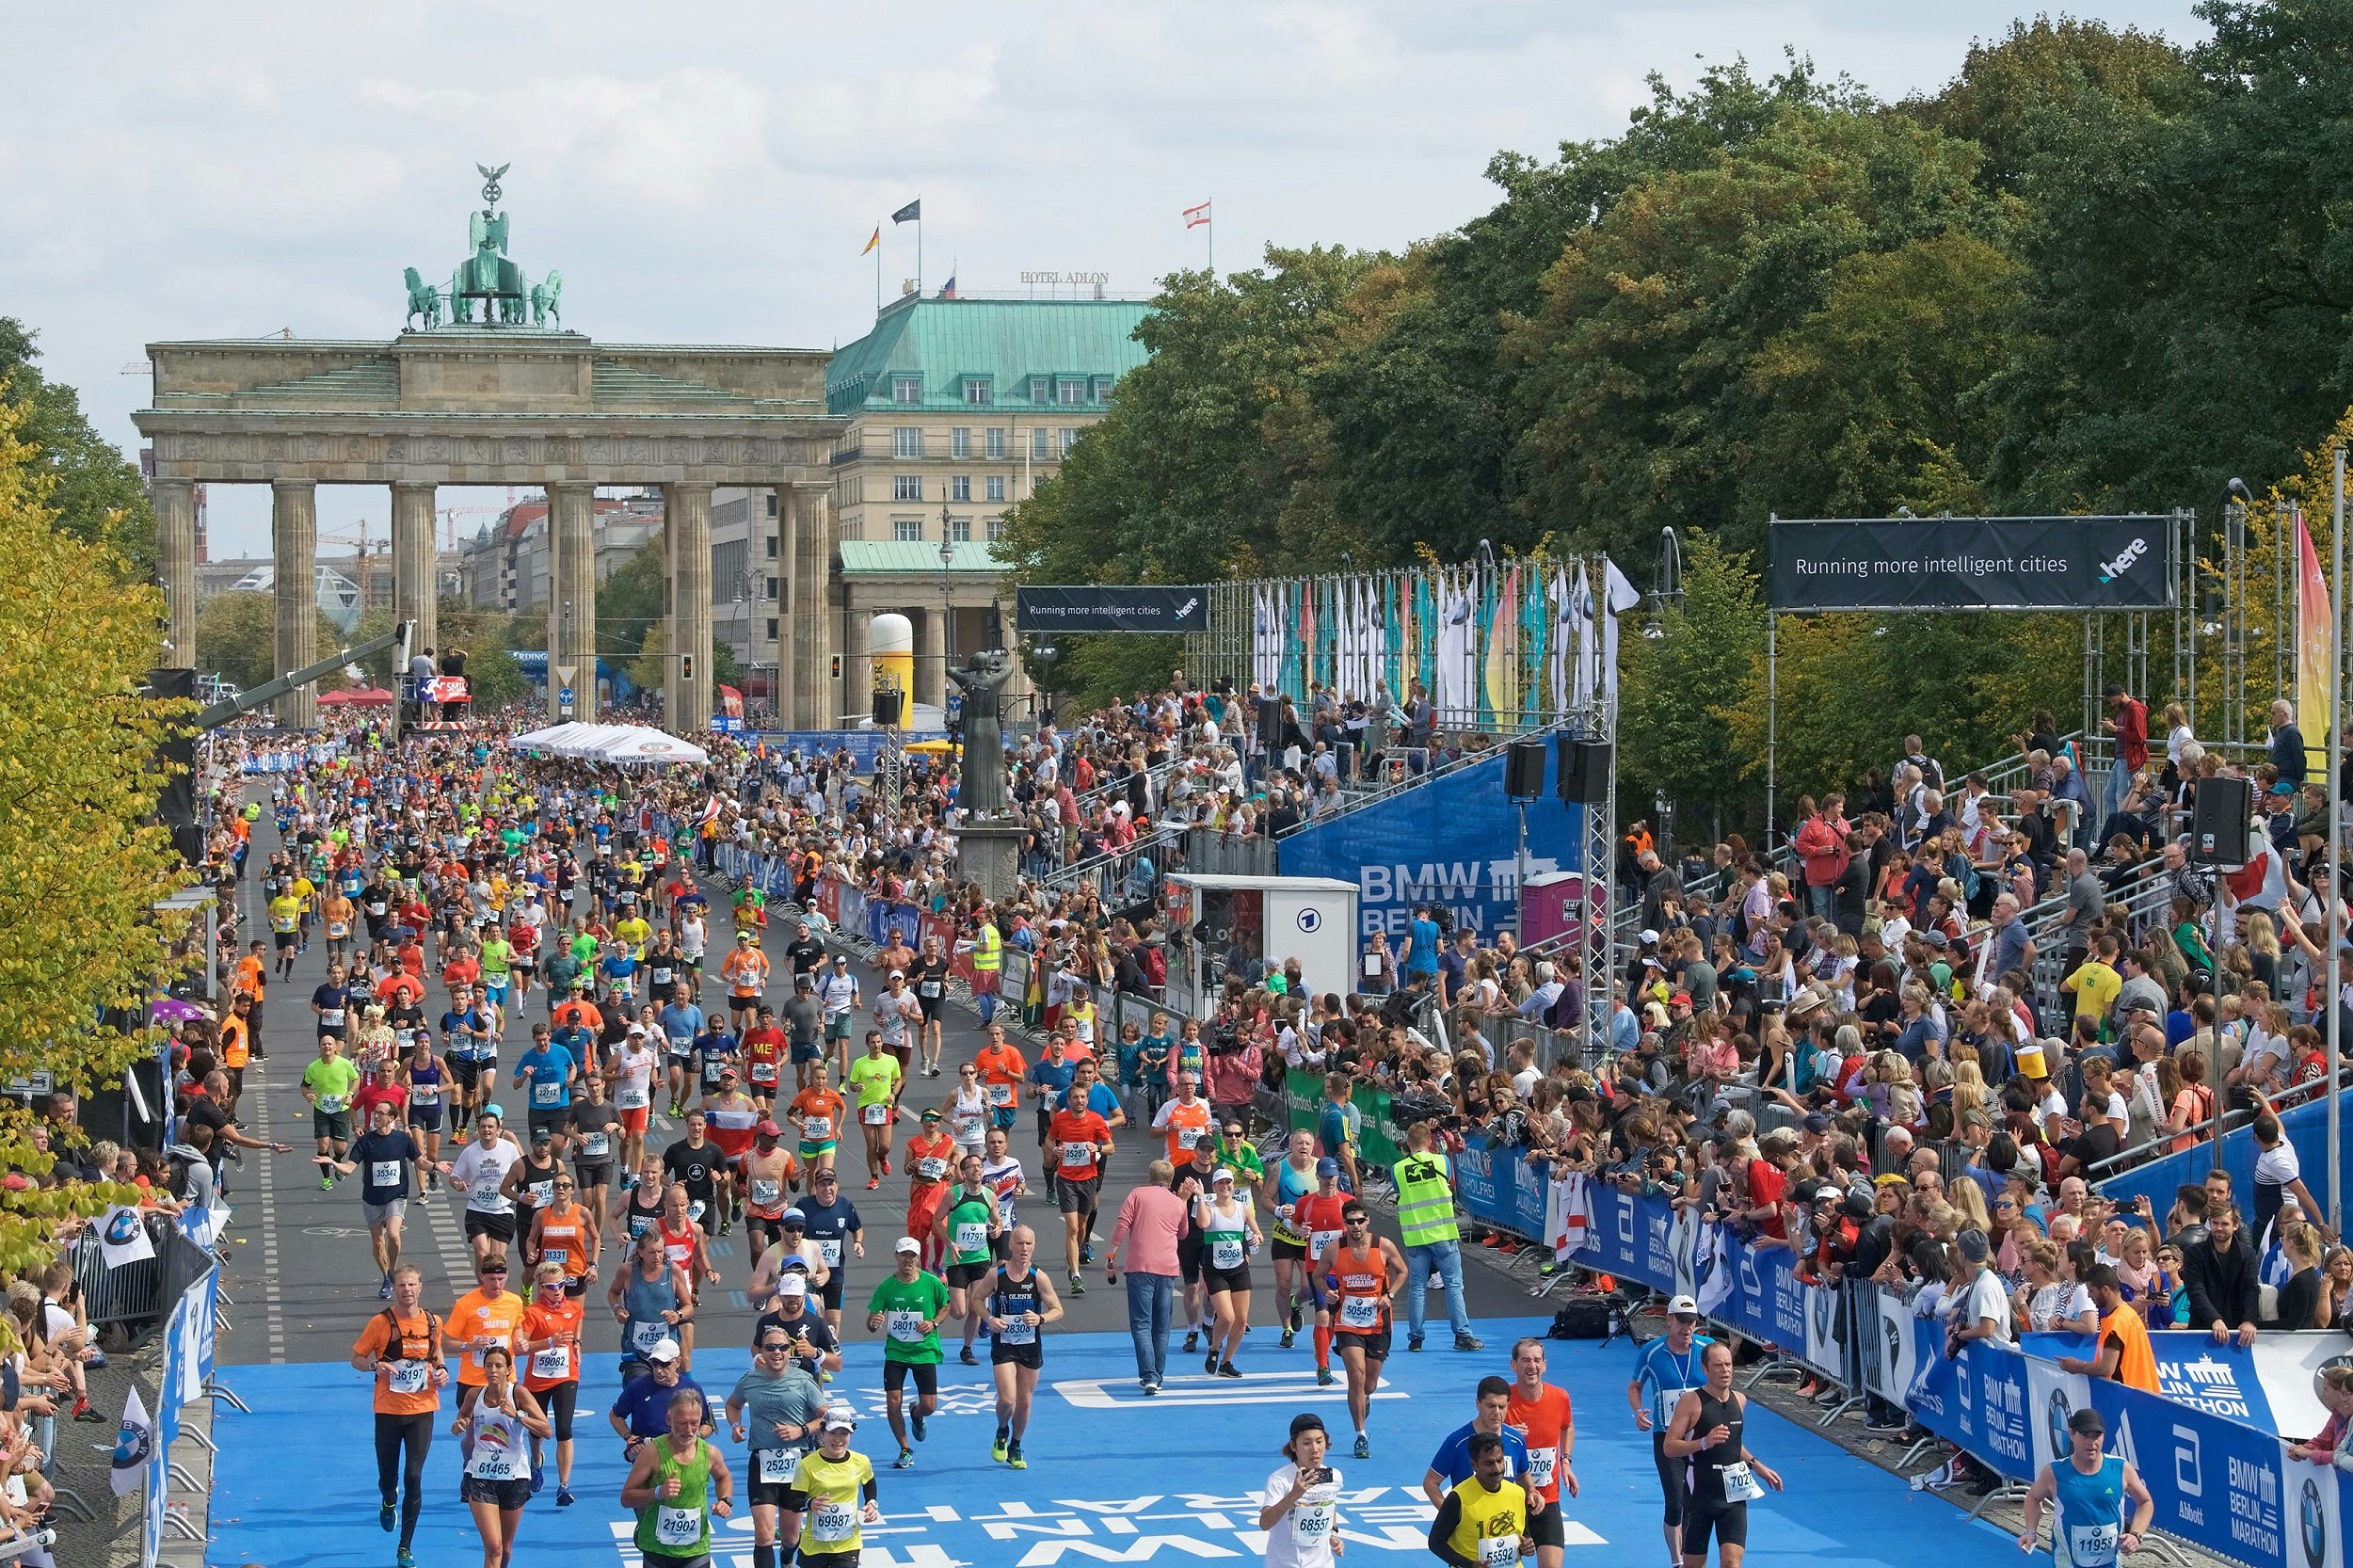 Thousands of runners stream through the Brandenburg Gate and run towards the camera down a tree-lined boulevard.